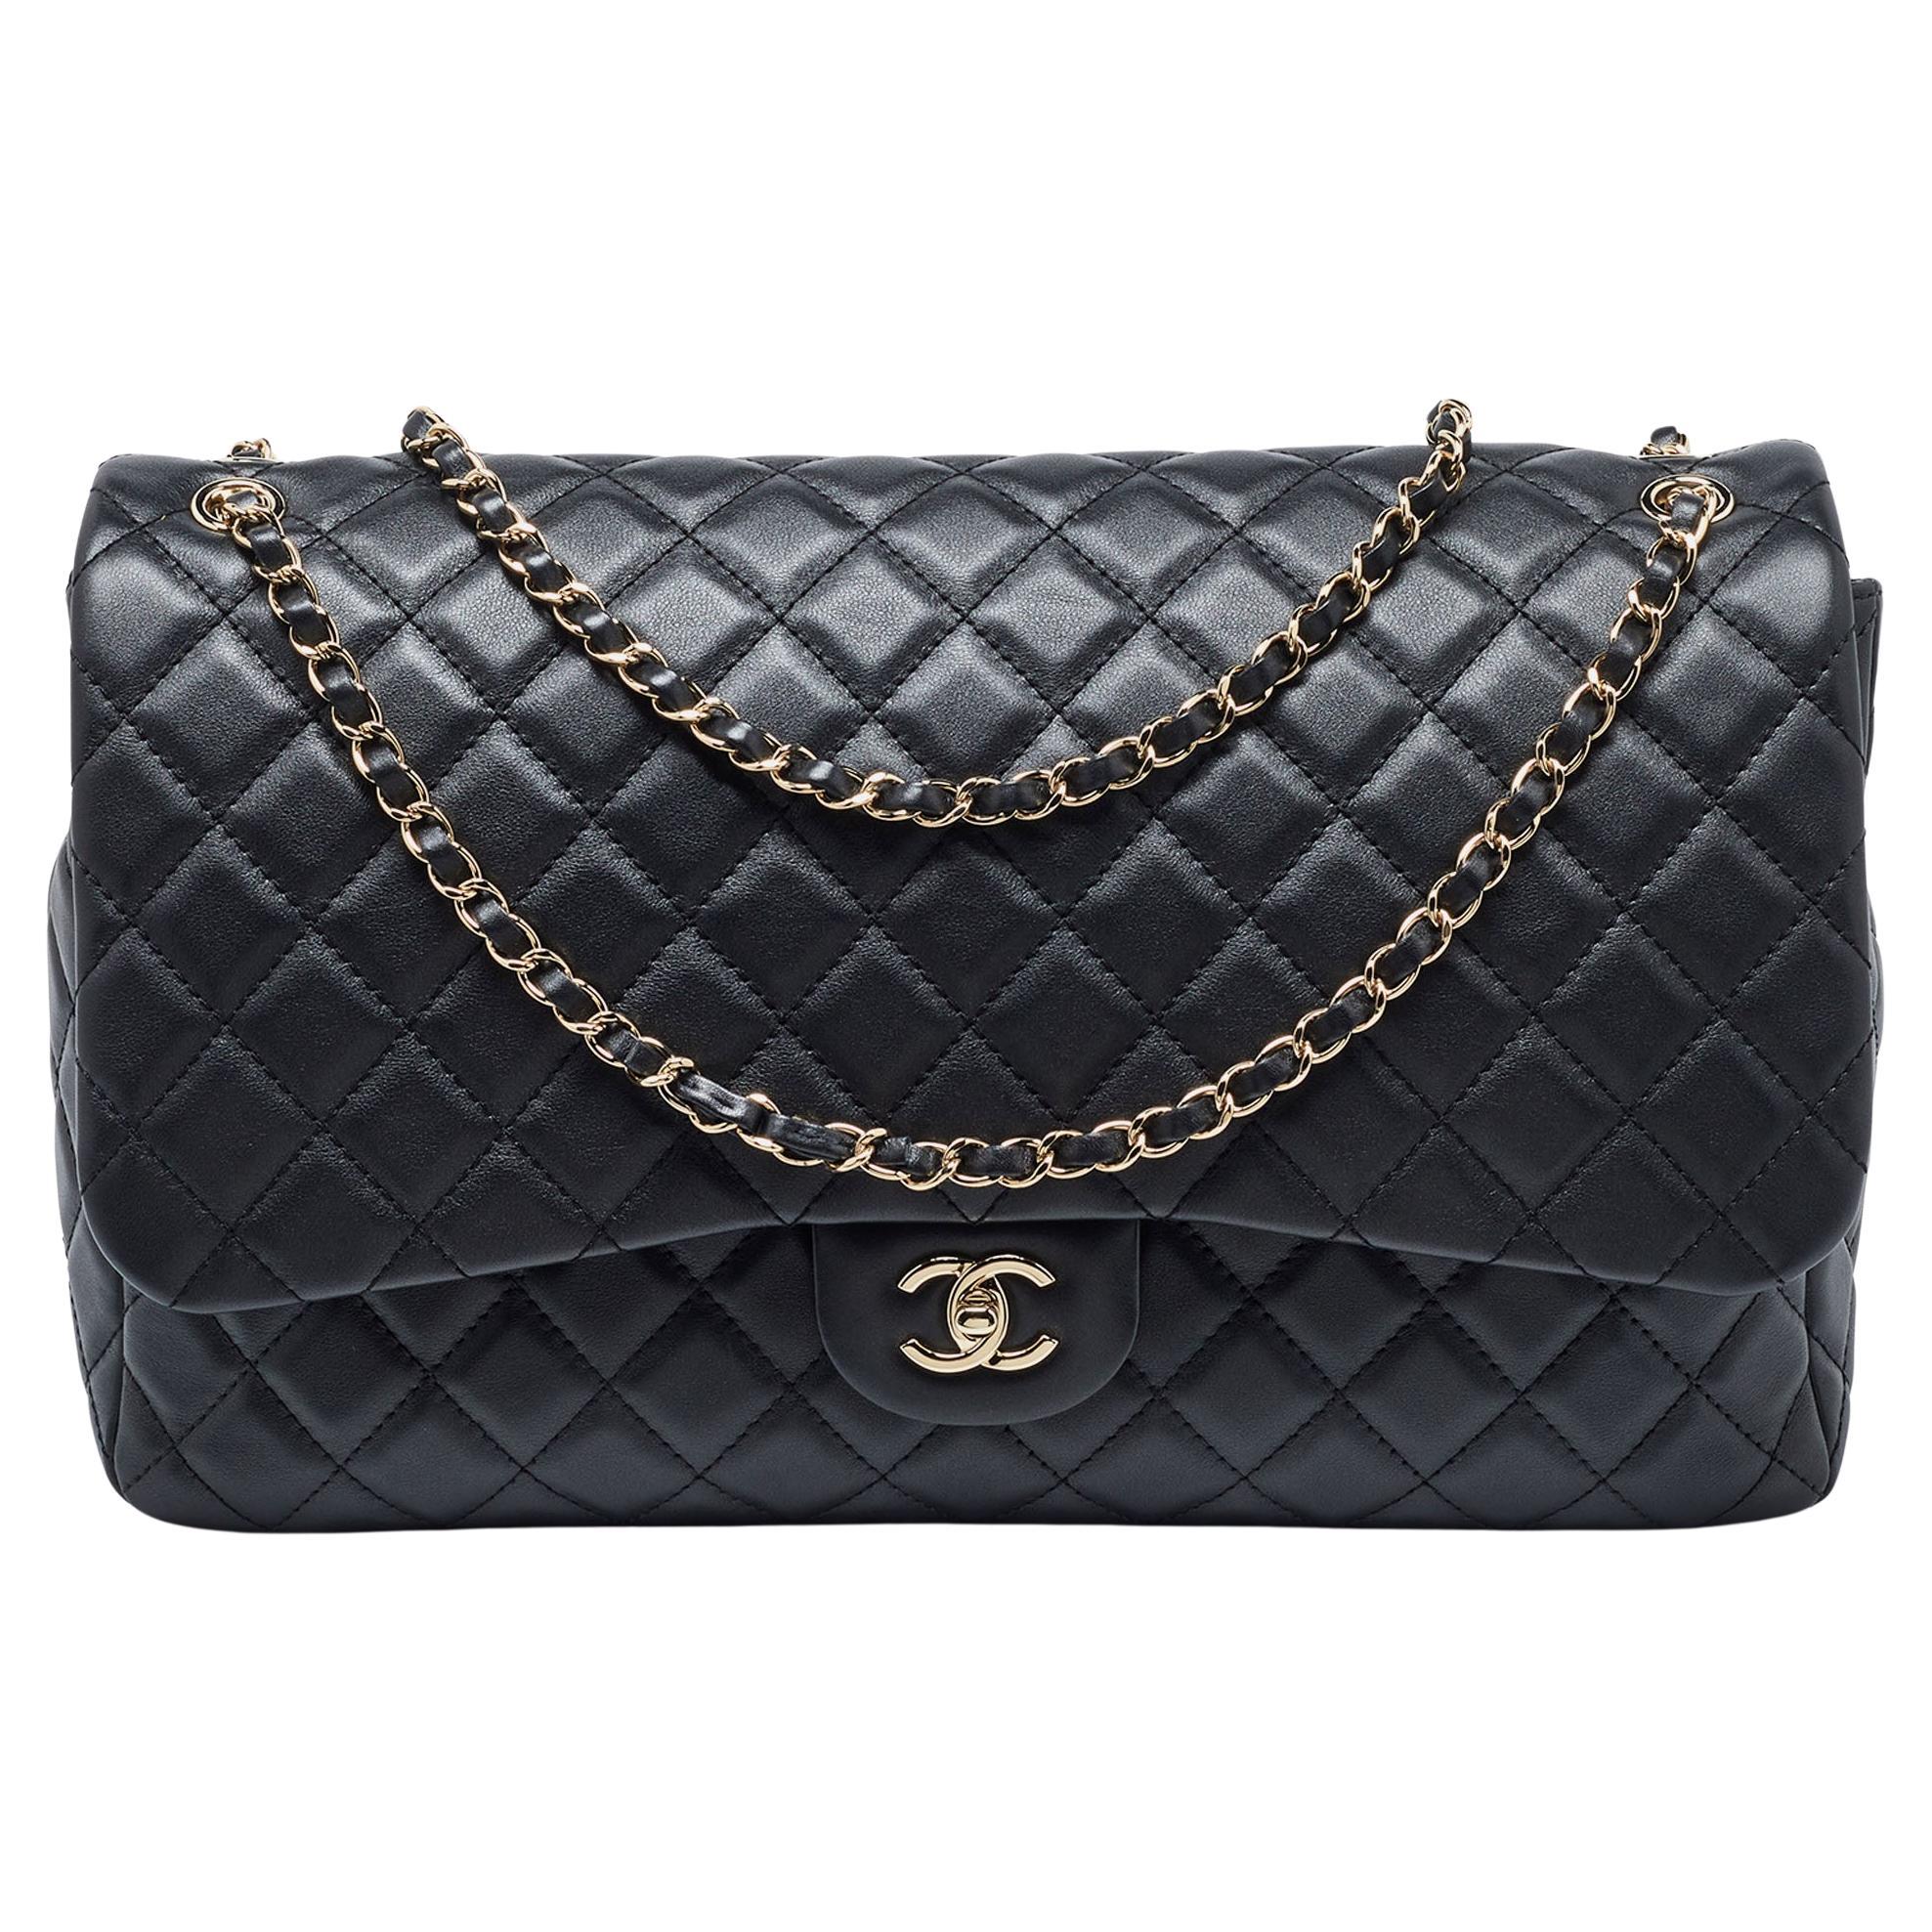 Chanel Black Quilted Lambskin Leather Small XXL Travel Flap Shoulder Bag